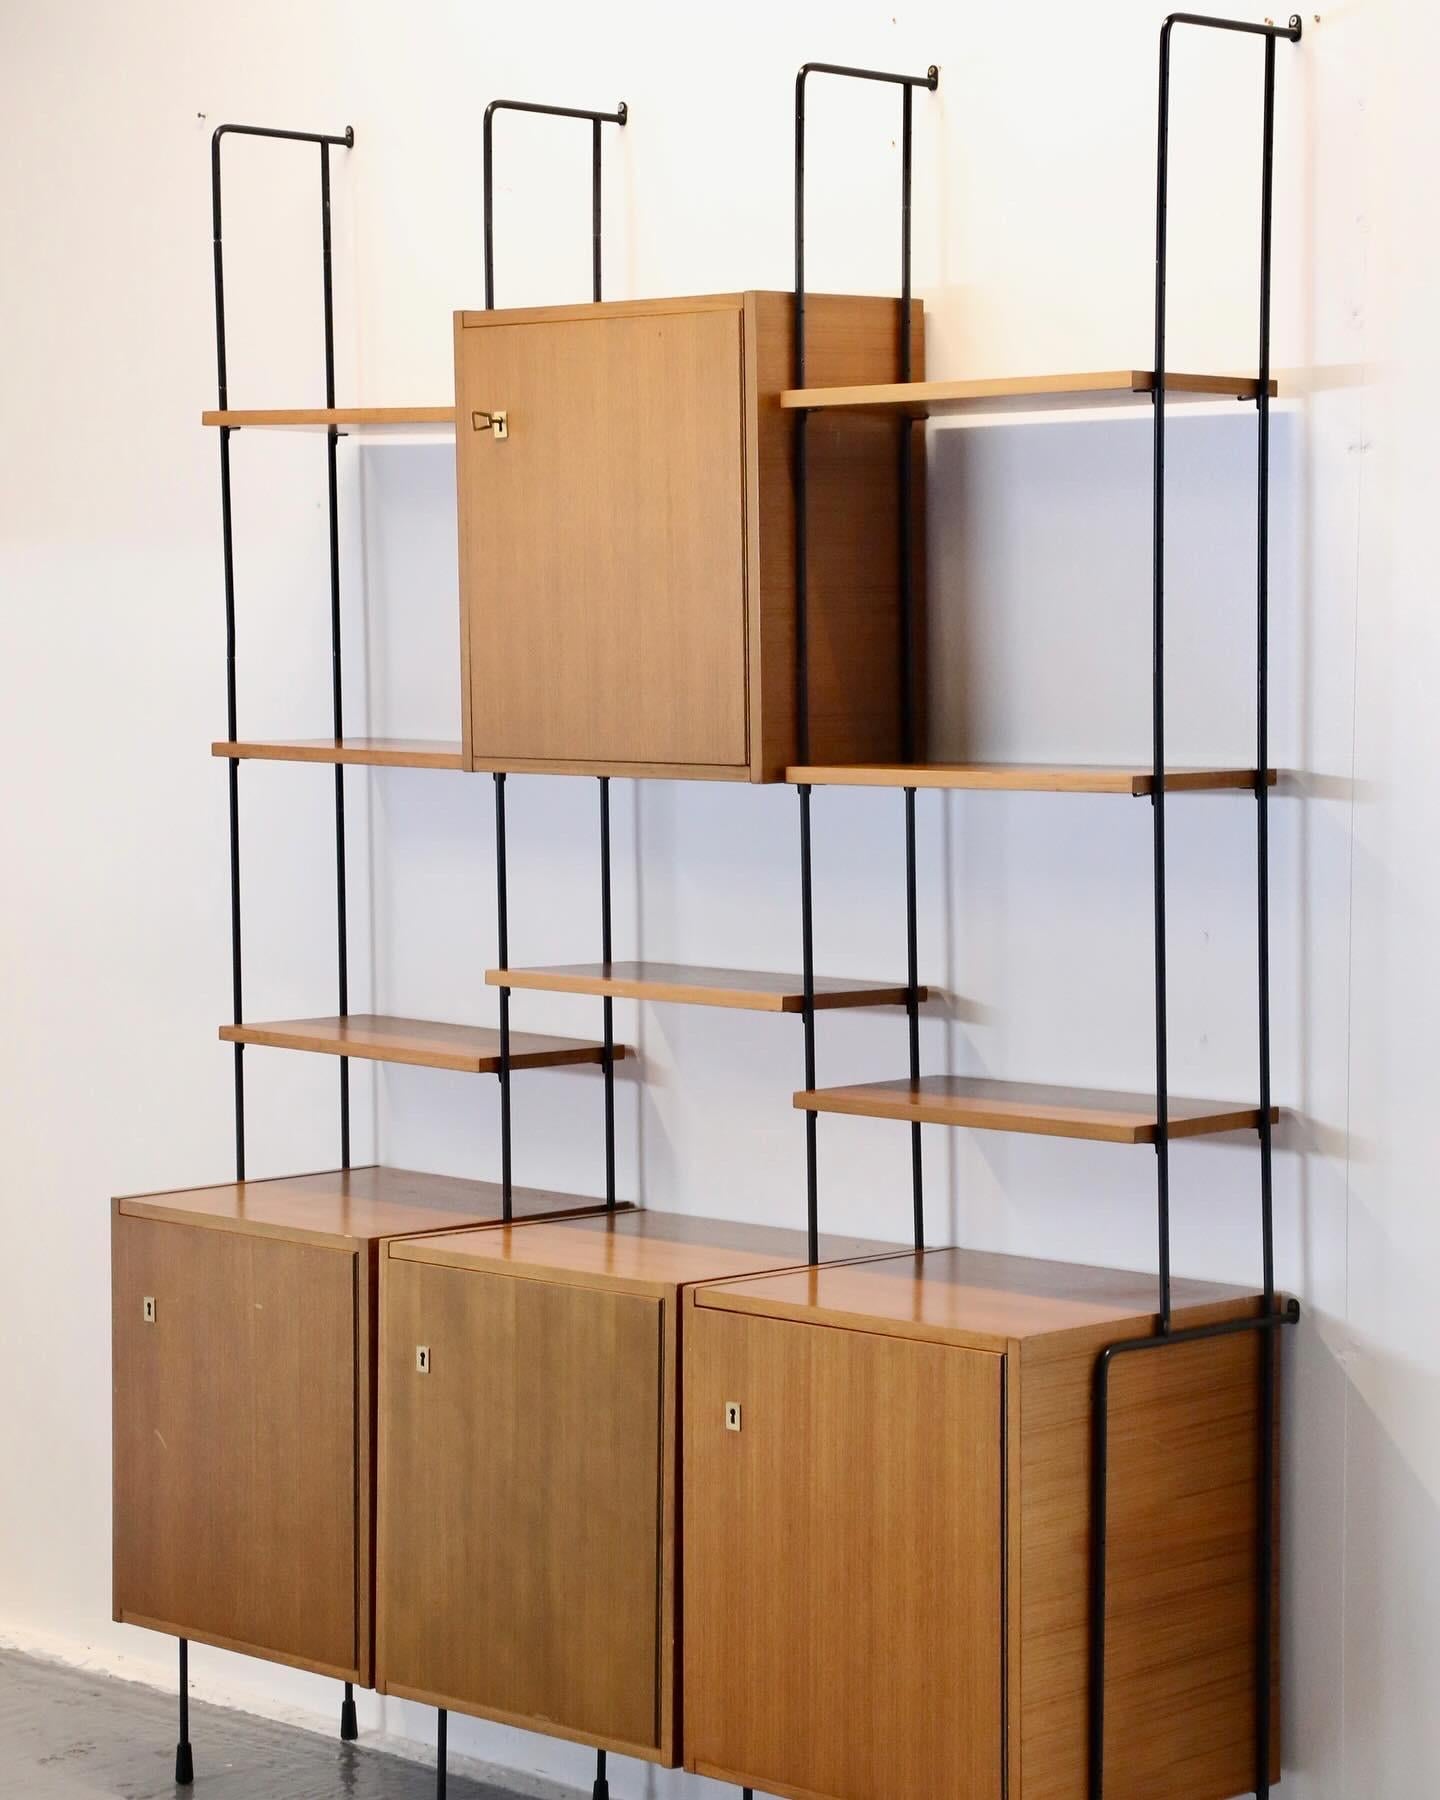 
A Fabulous German design classic ‘Omnia’ Modular Wall Unit by Ernst Dieter Hilker. Highly decorative minimalist design with black lacquered metal uprights and high quality walnut finished cabinets, and shelves - with crisp maple lined insides.